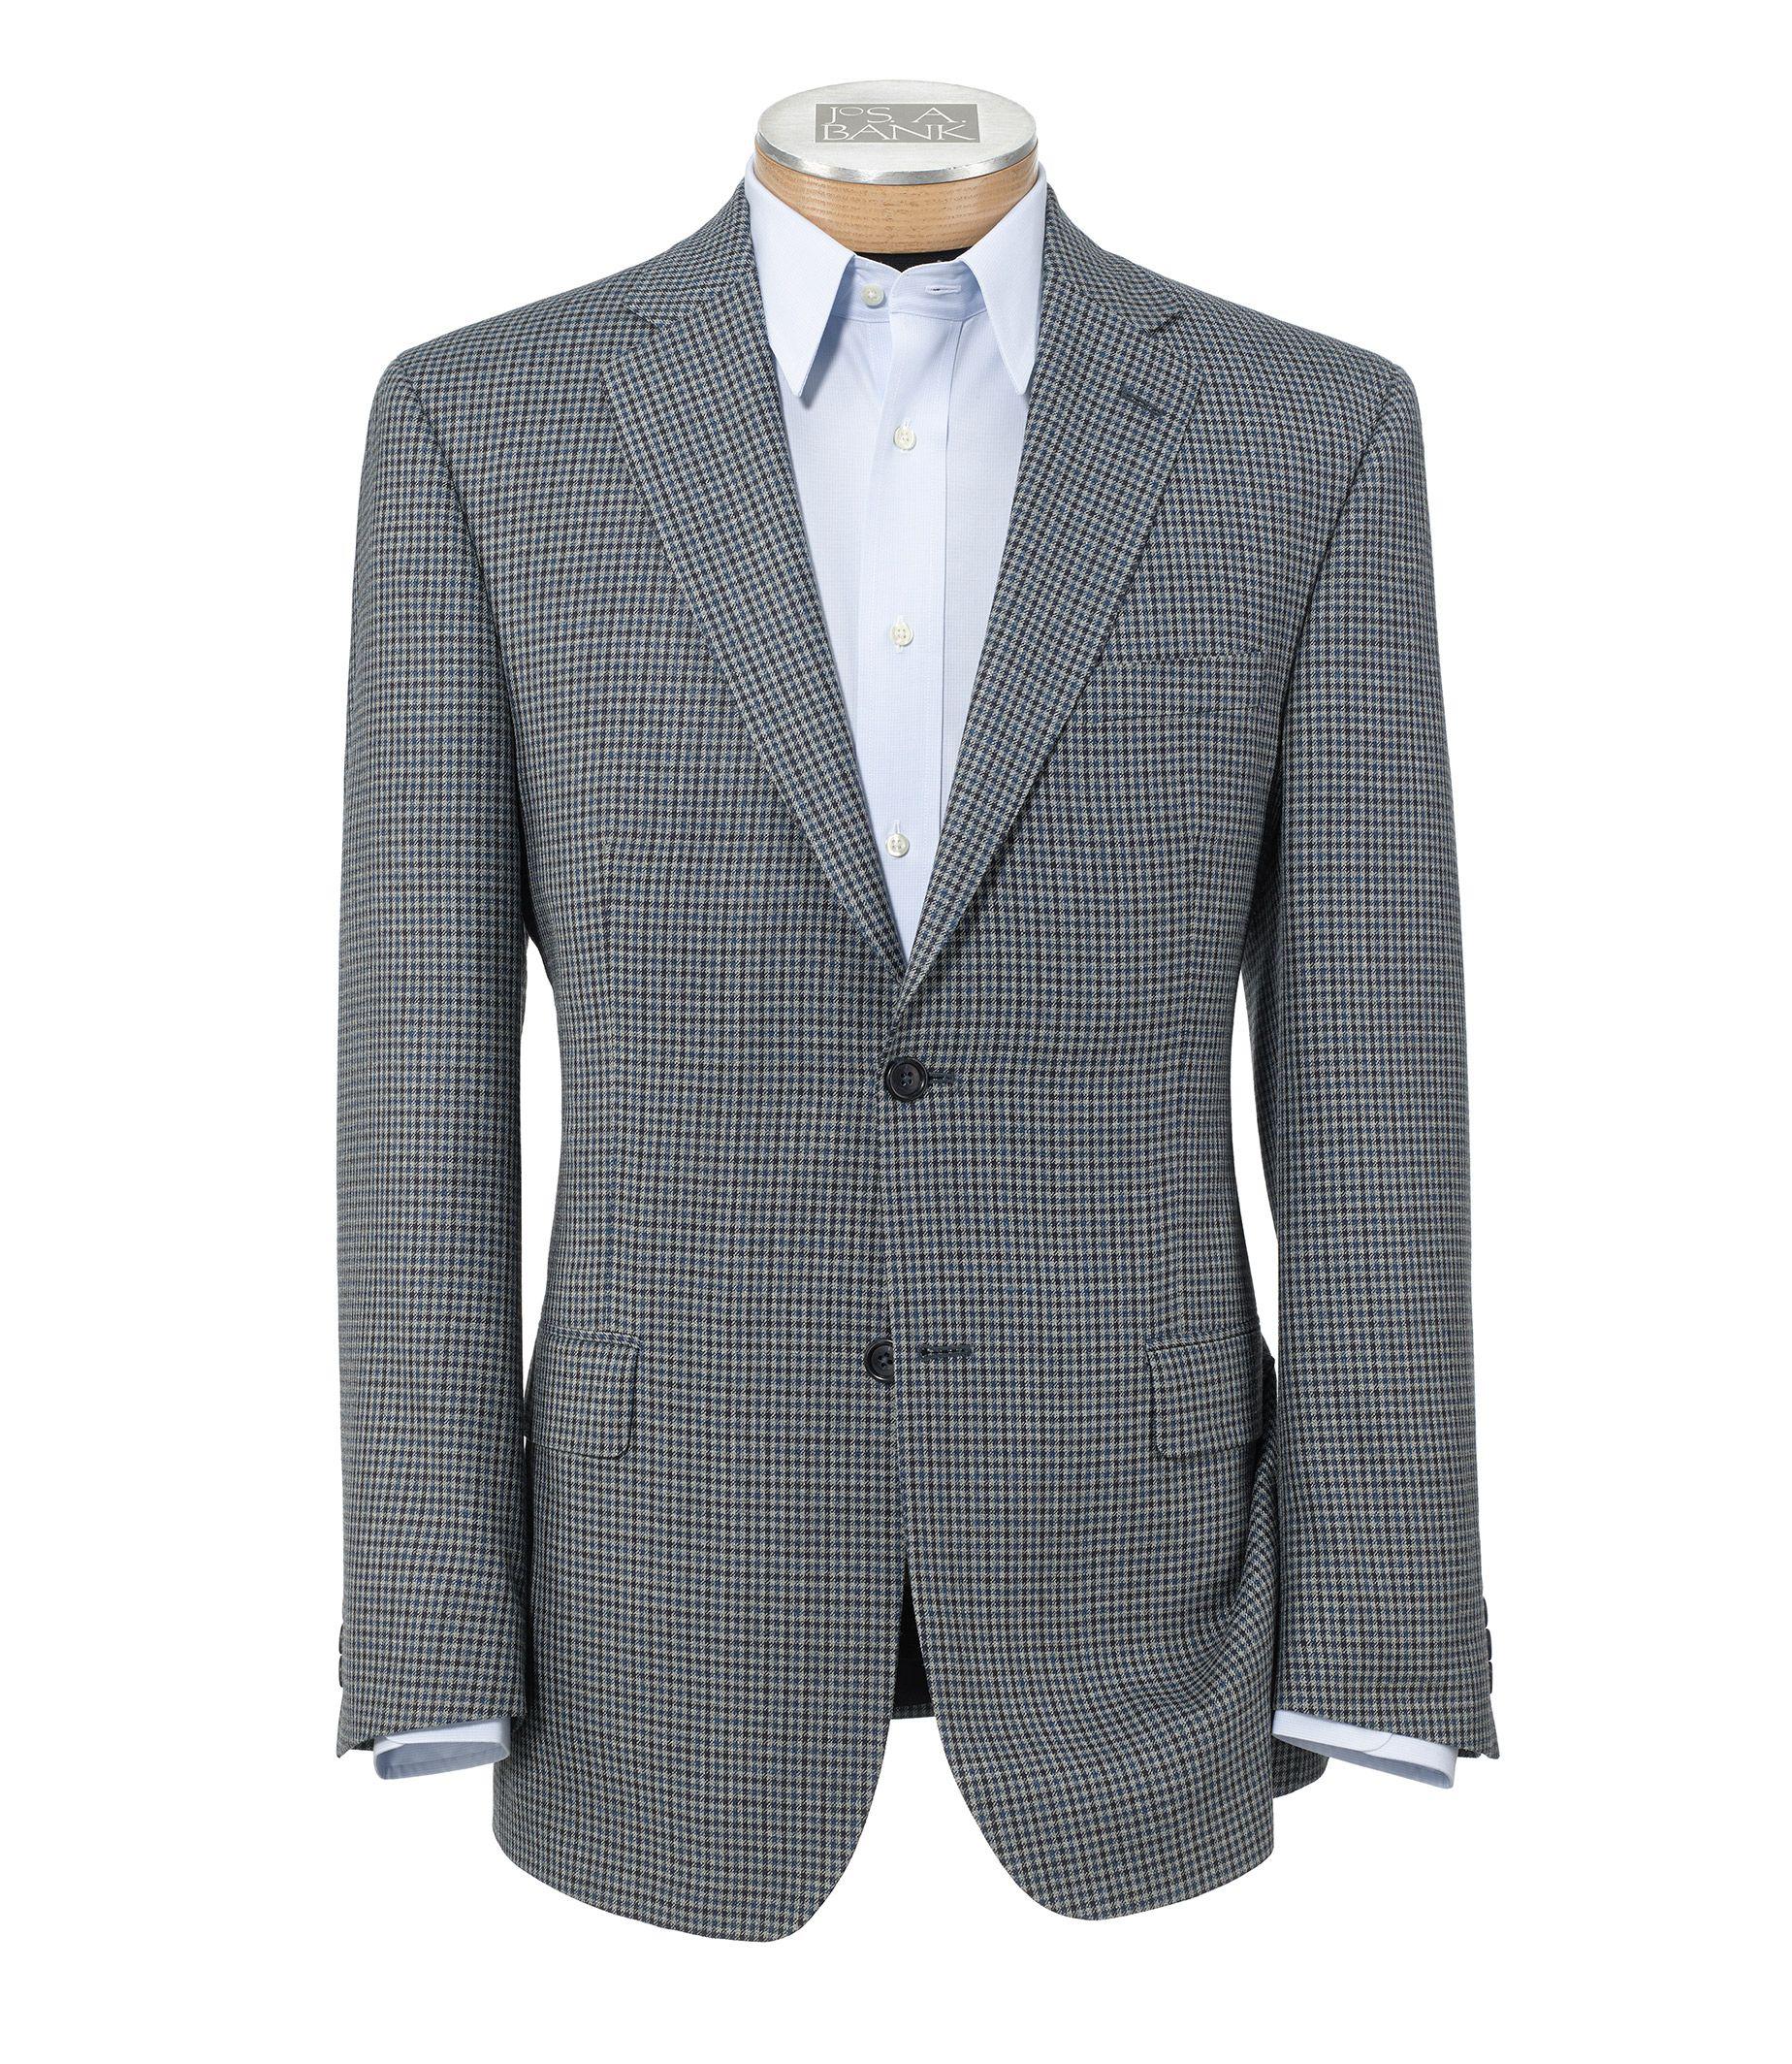 Lyst - Jos. A. Bank Traveler Tailored Fit 2-button Sportcoat Clearance ...